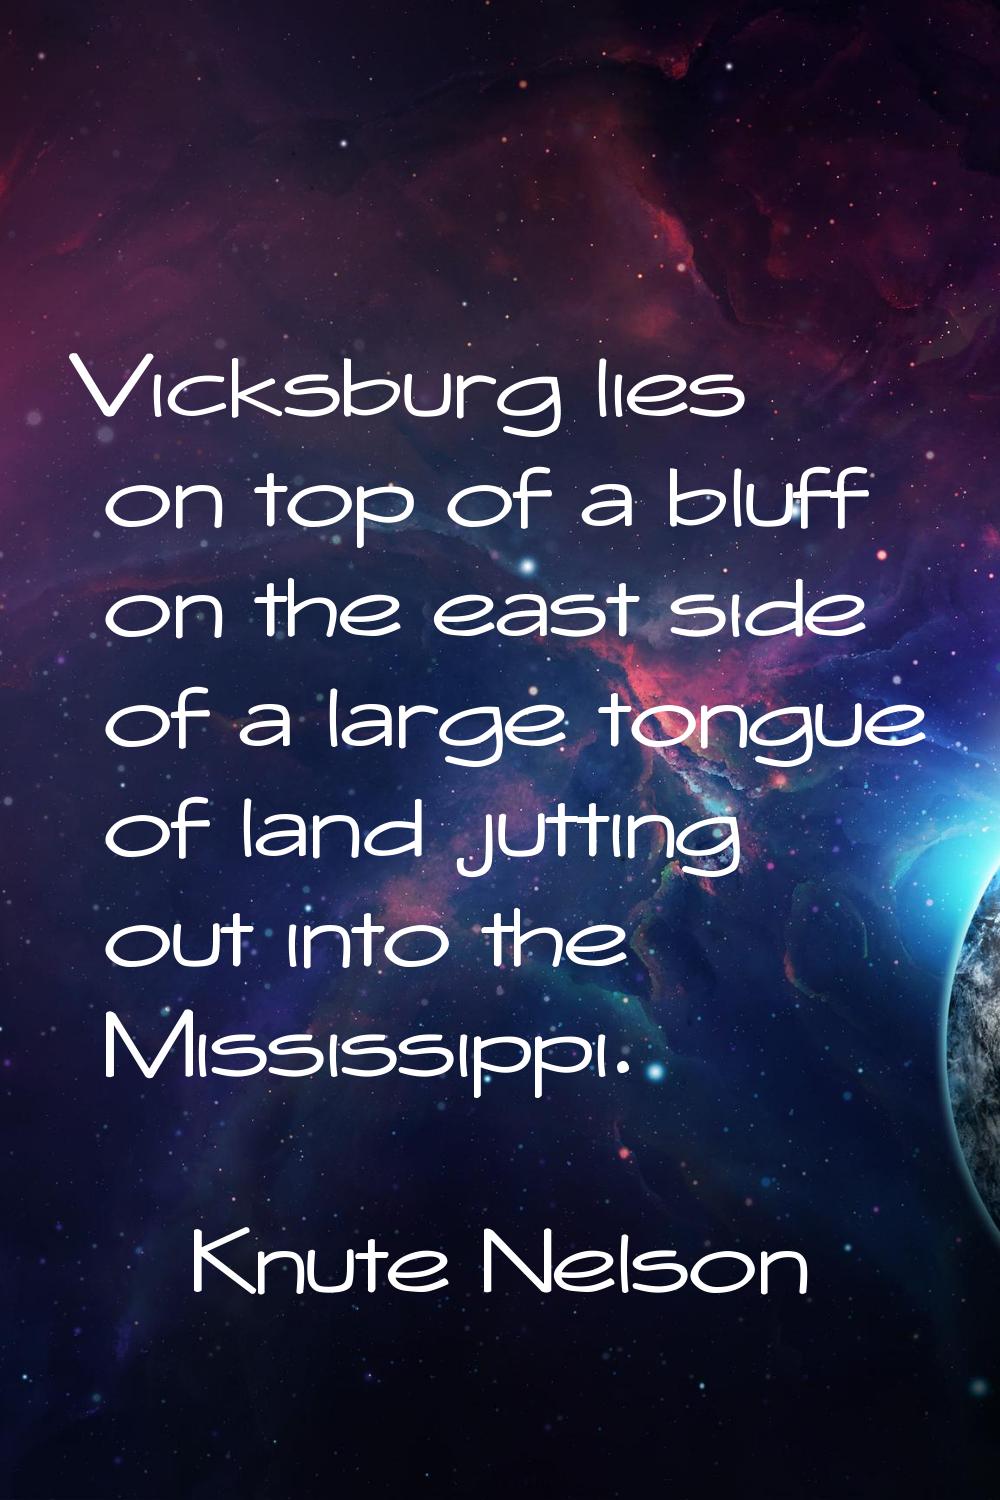 Vicksburg lies on top of a bluff on the east side of a large tongue of land jutting out into the Mi